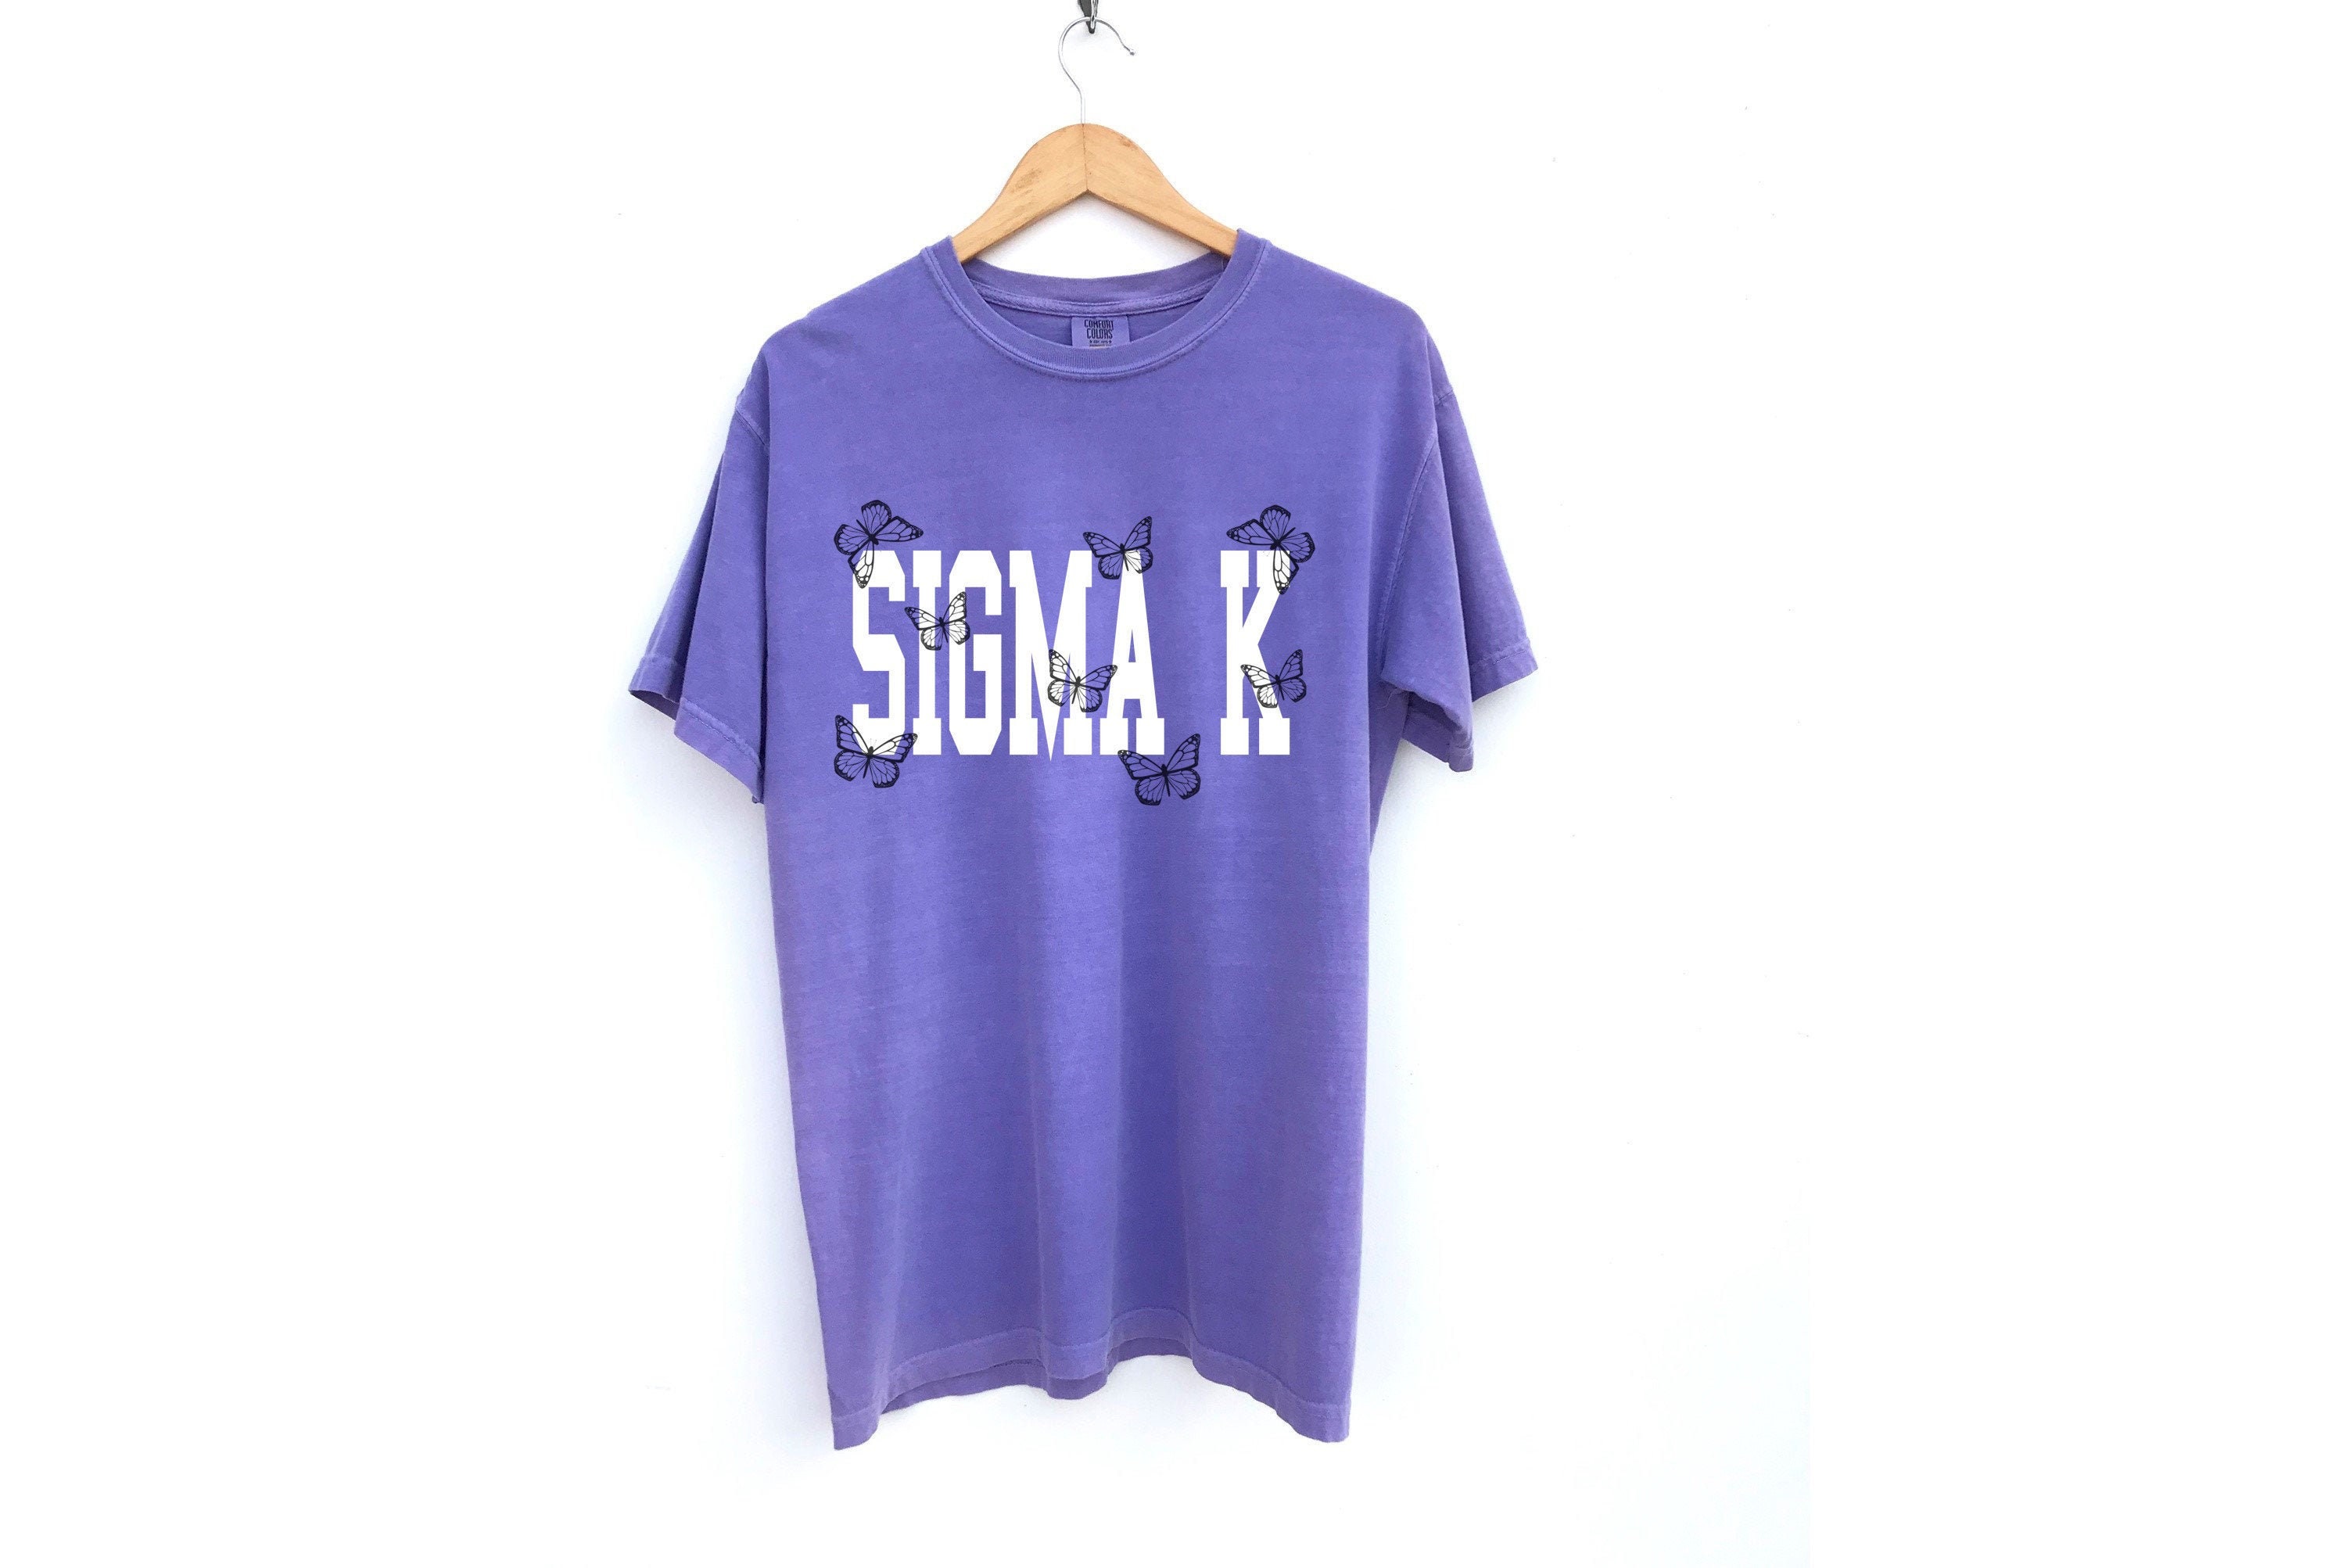 Available // Sorority the More Etsy Hong Kappa Keely // Colors - Shirt // K Butterfly // Sigma Comfort Sigma Colors Kong